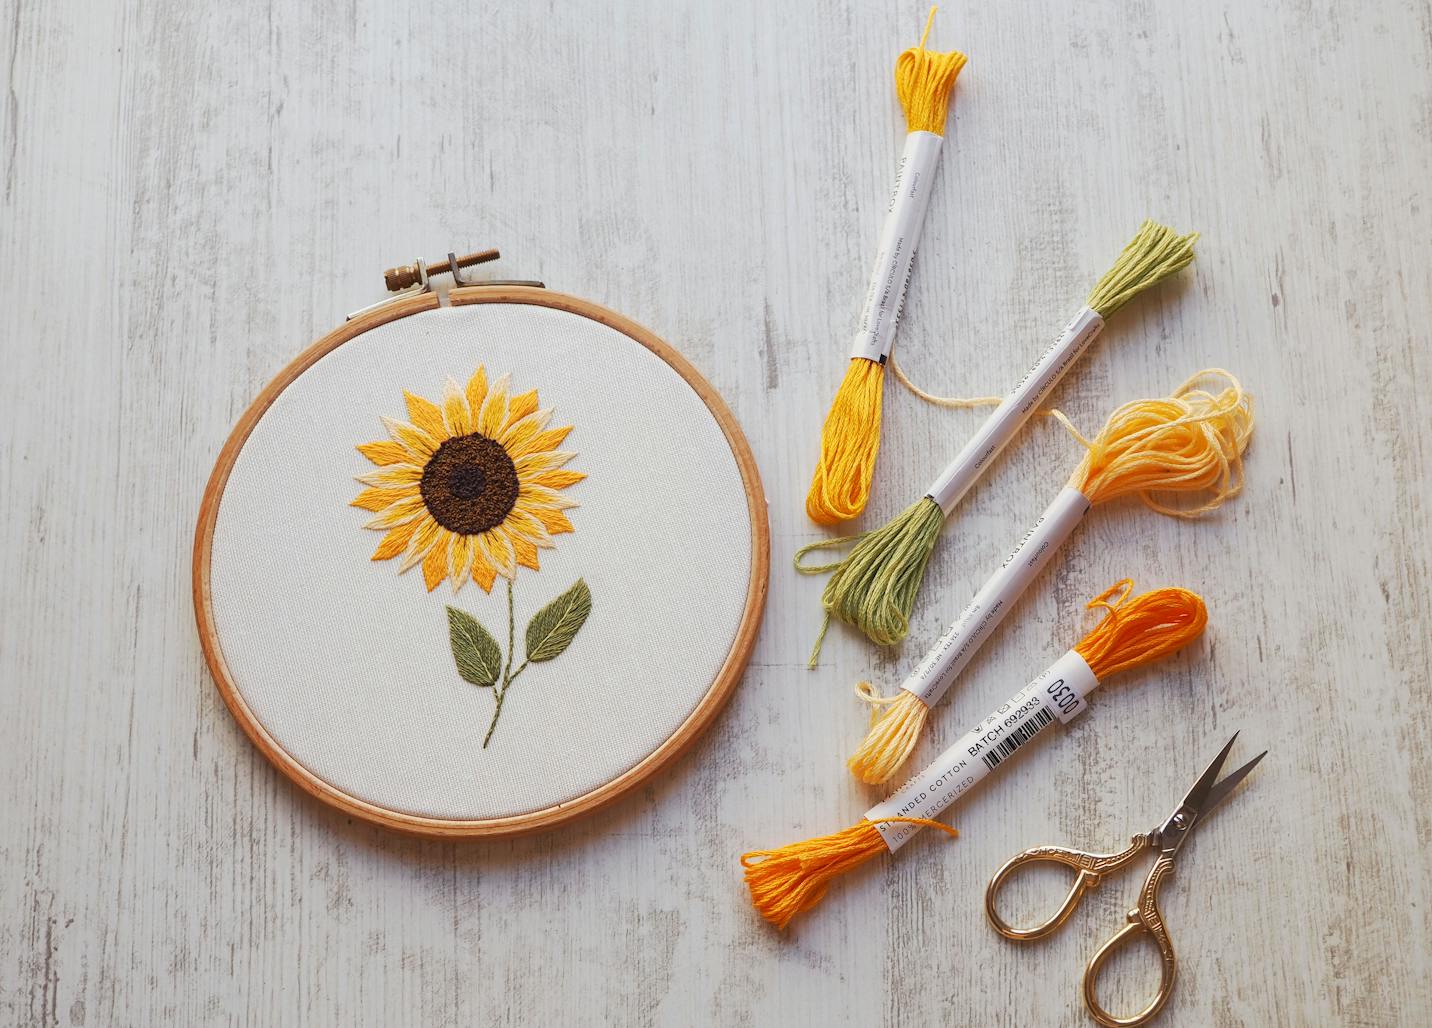 Sunflower embroidery pattern and yarns